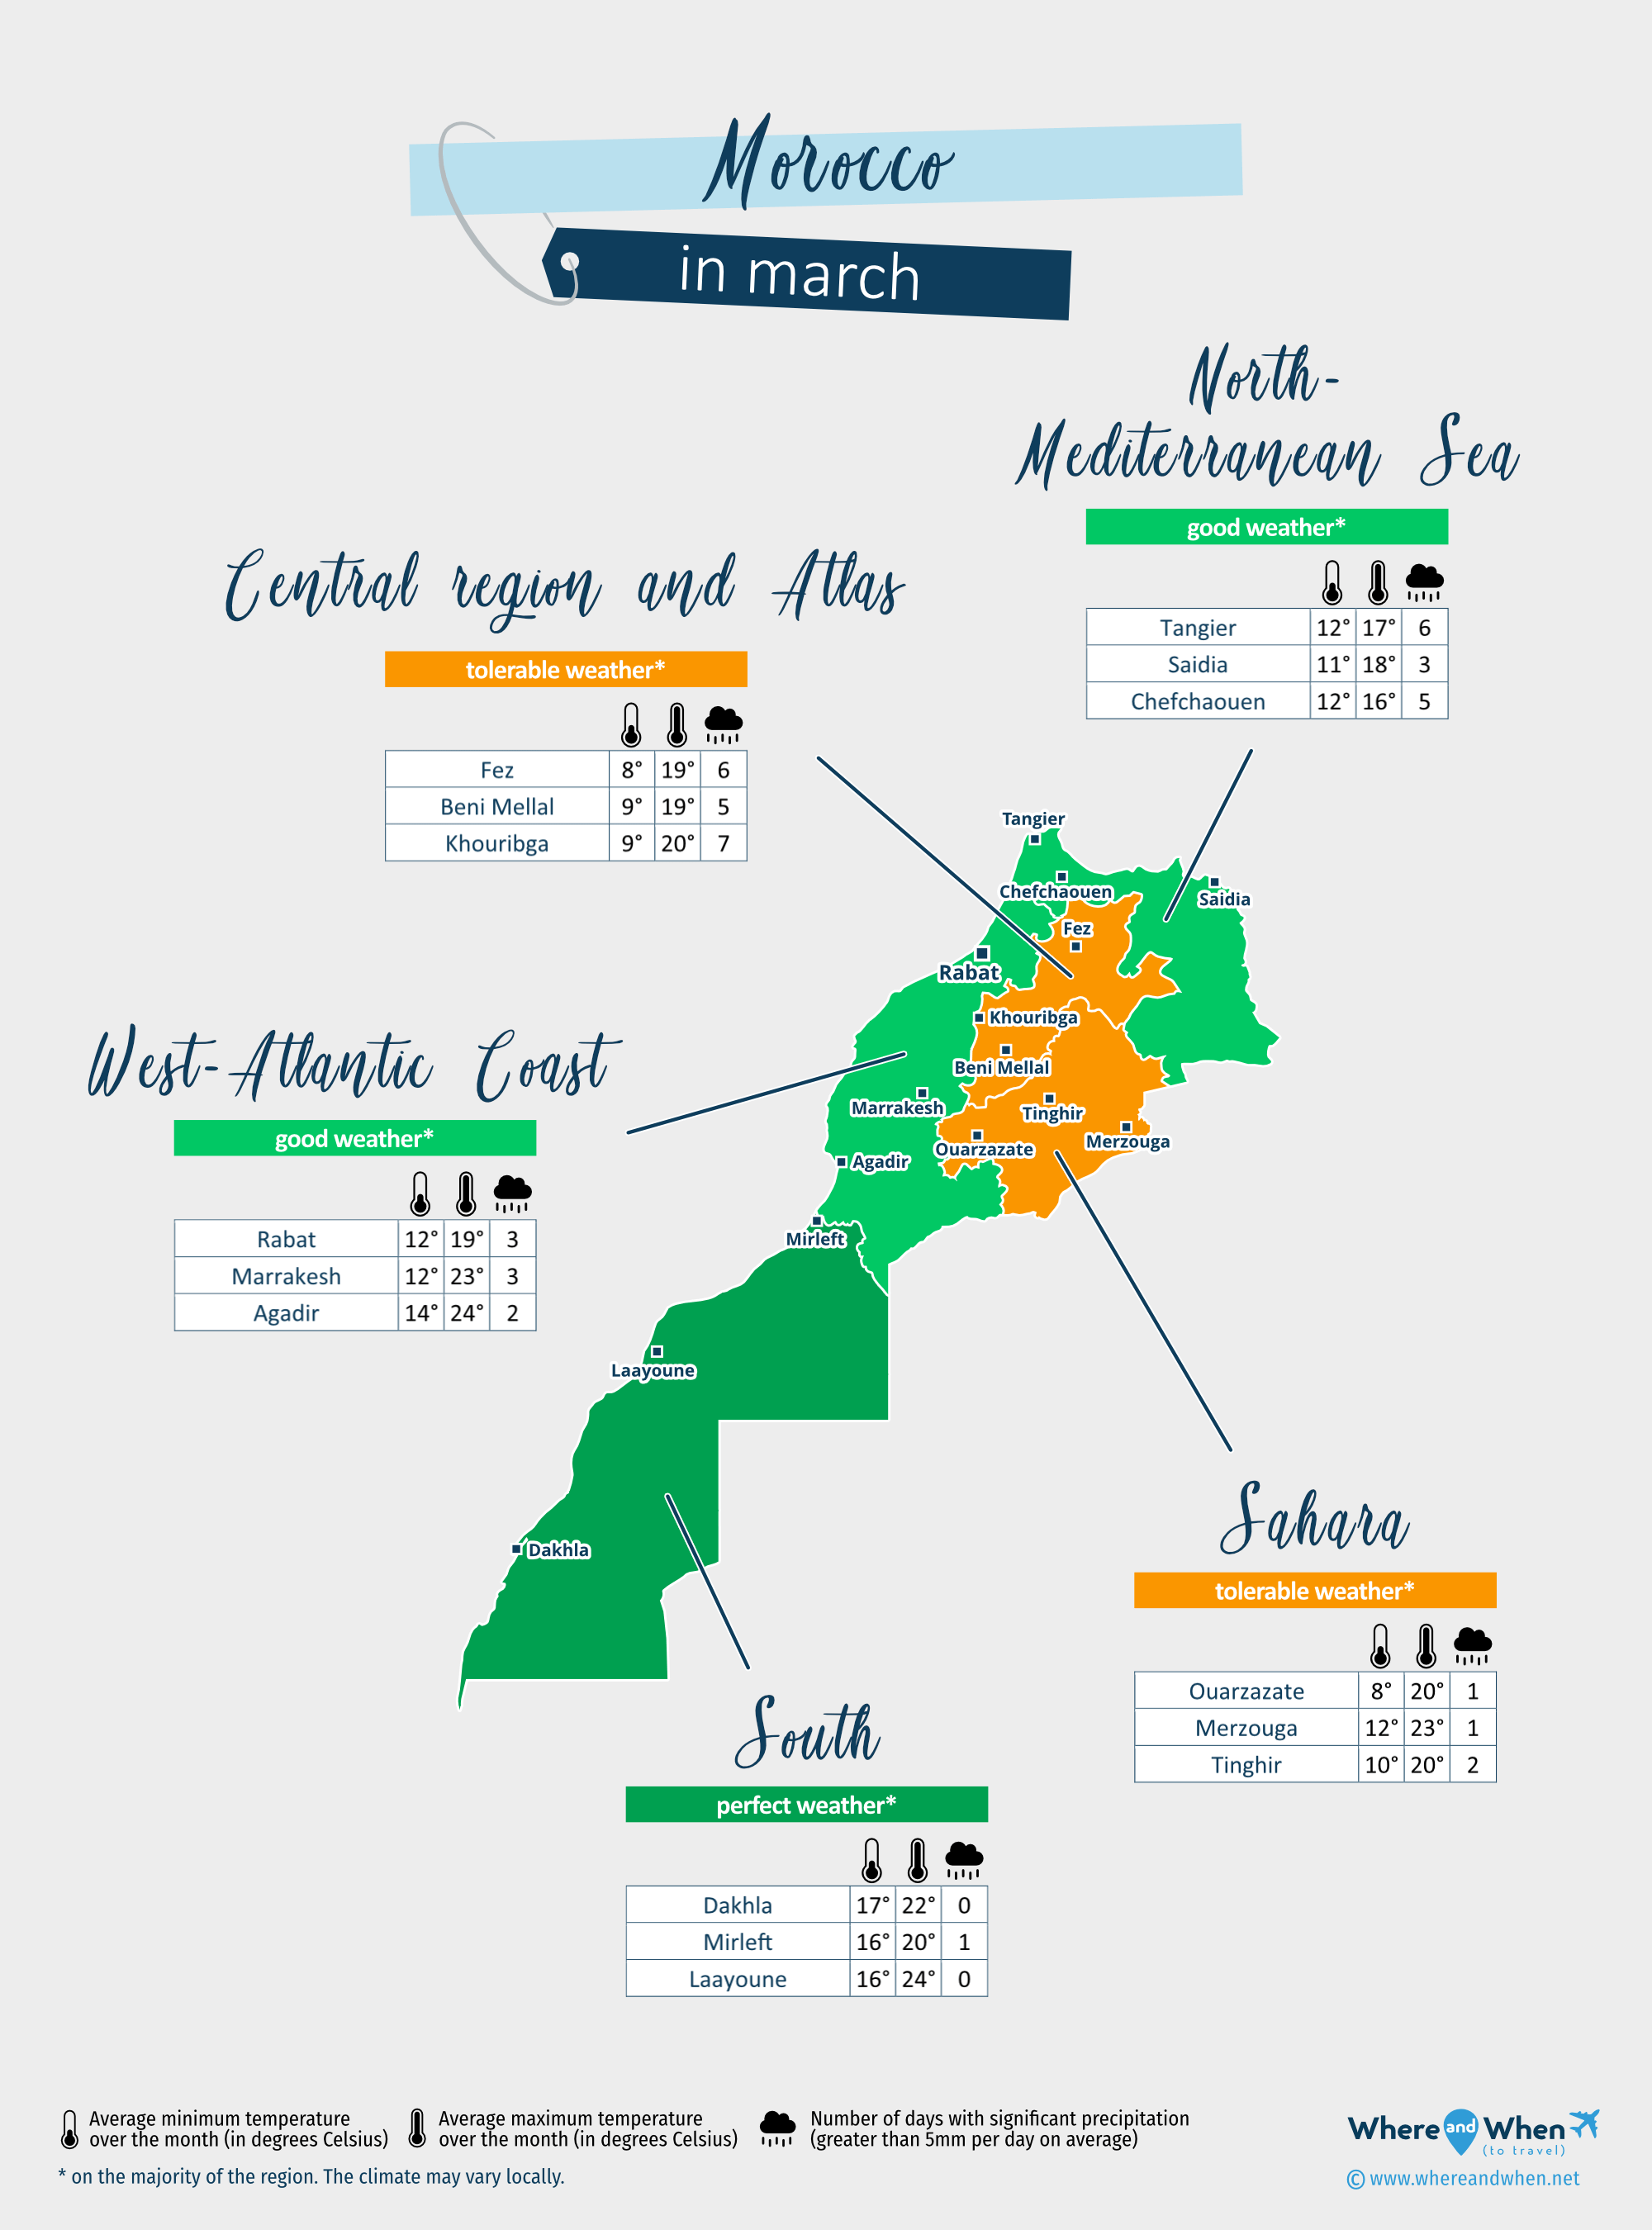 Morocco: weather map in march in different regions